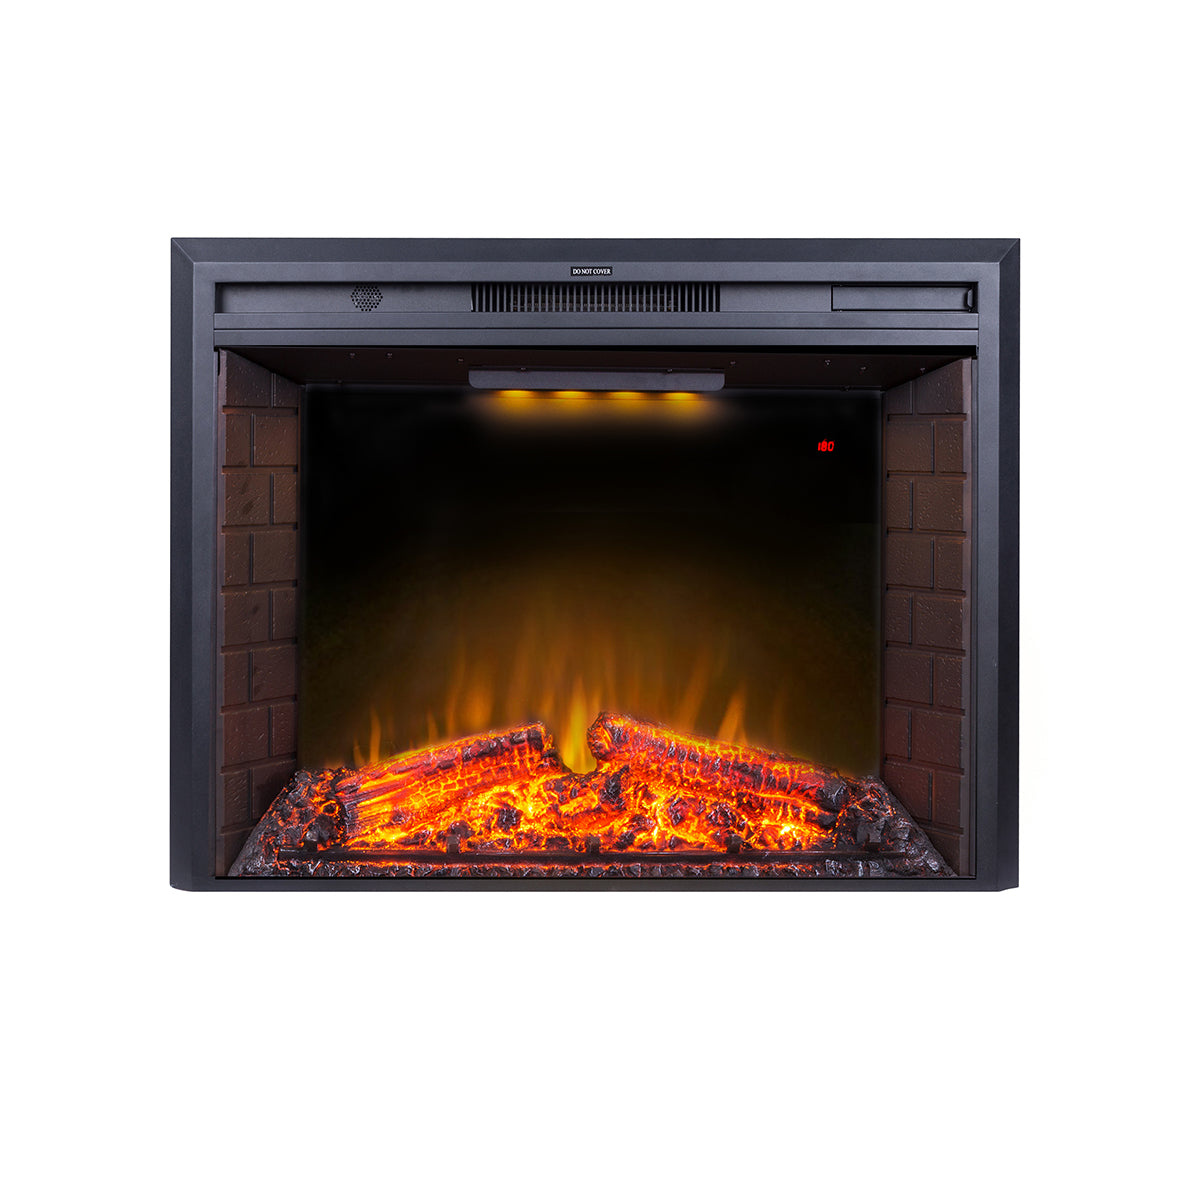 33 Inches Electric Fireplace Insert, Fireplace Heater with Overheating Protection, Black-Boyel Living